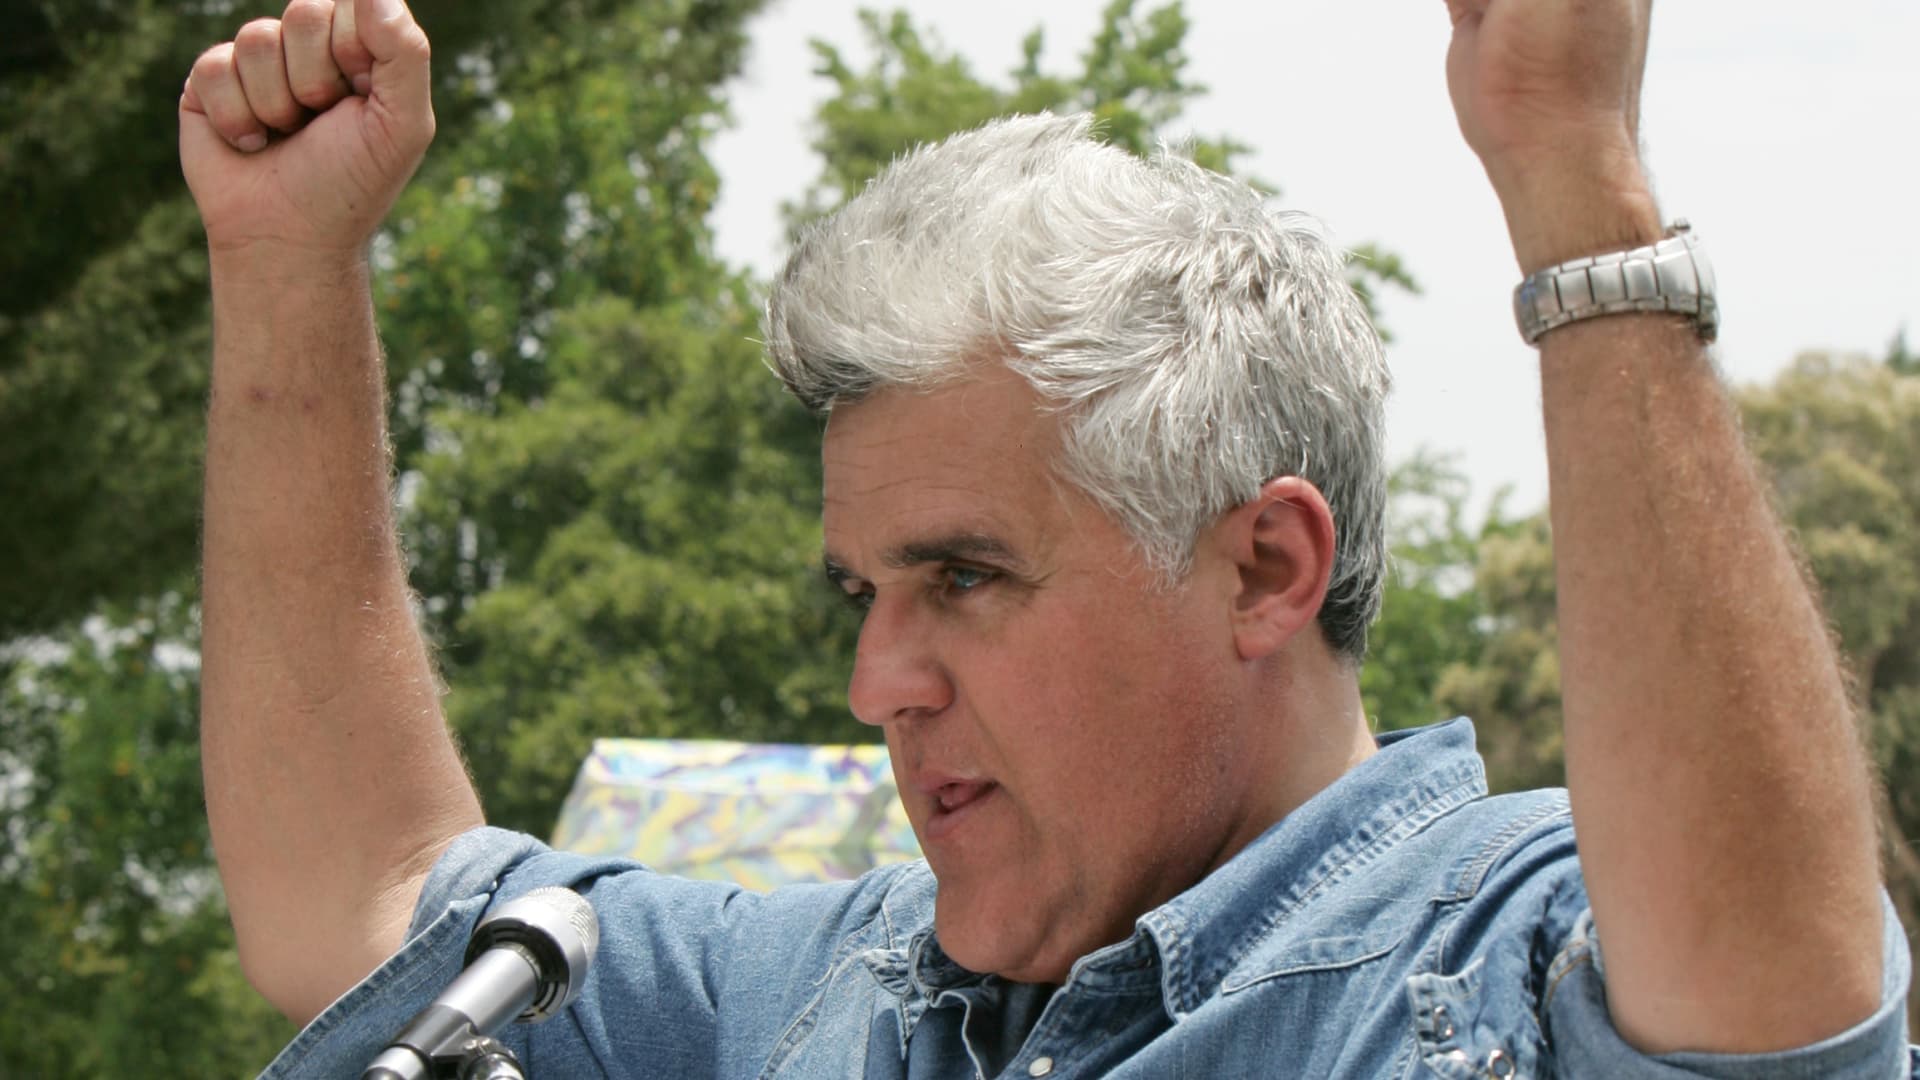 Jay Leno loves his Tesla: 'There's almost no reason to have a gas car'